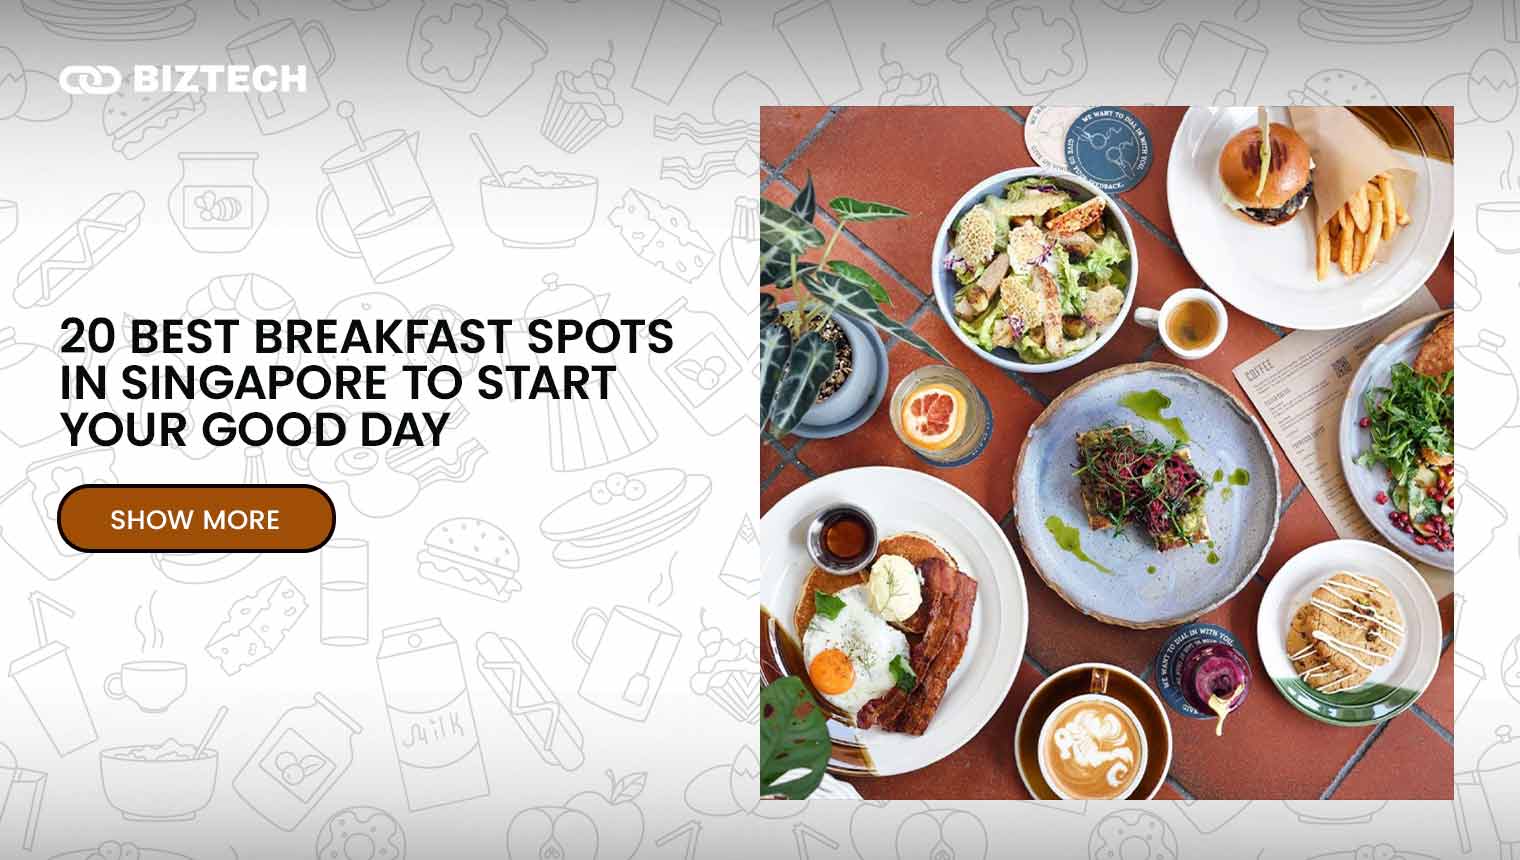 20 Best Breakfast Spots in Singapore to Boost Your Morning Fuel for the Day